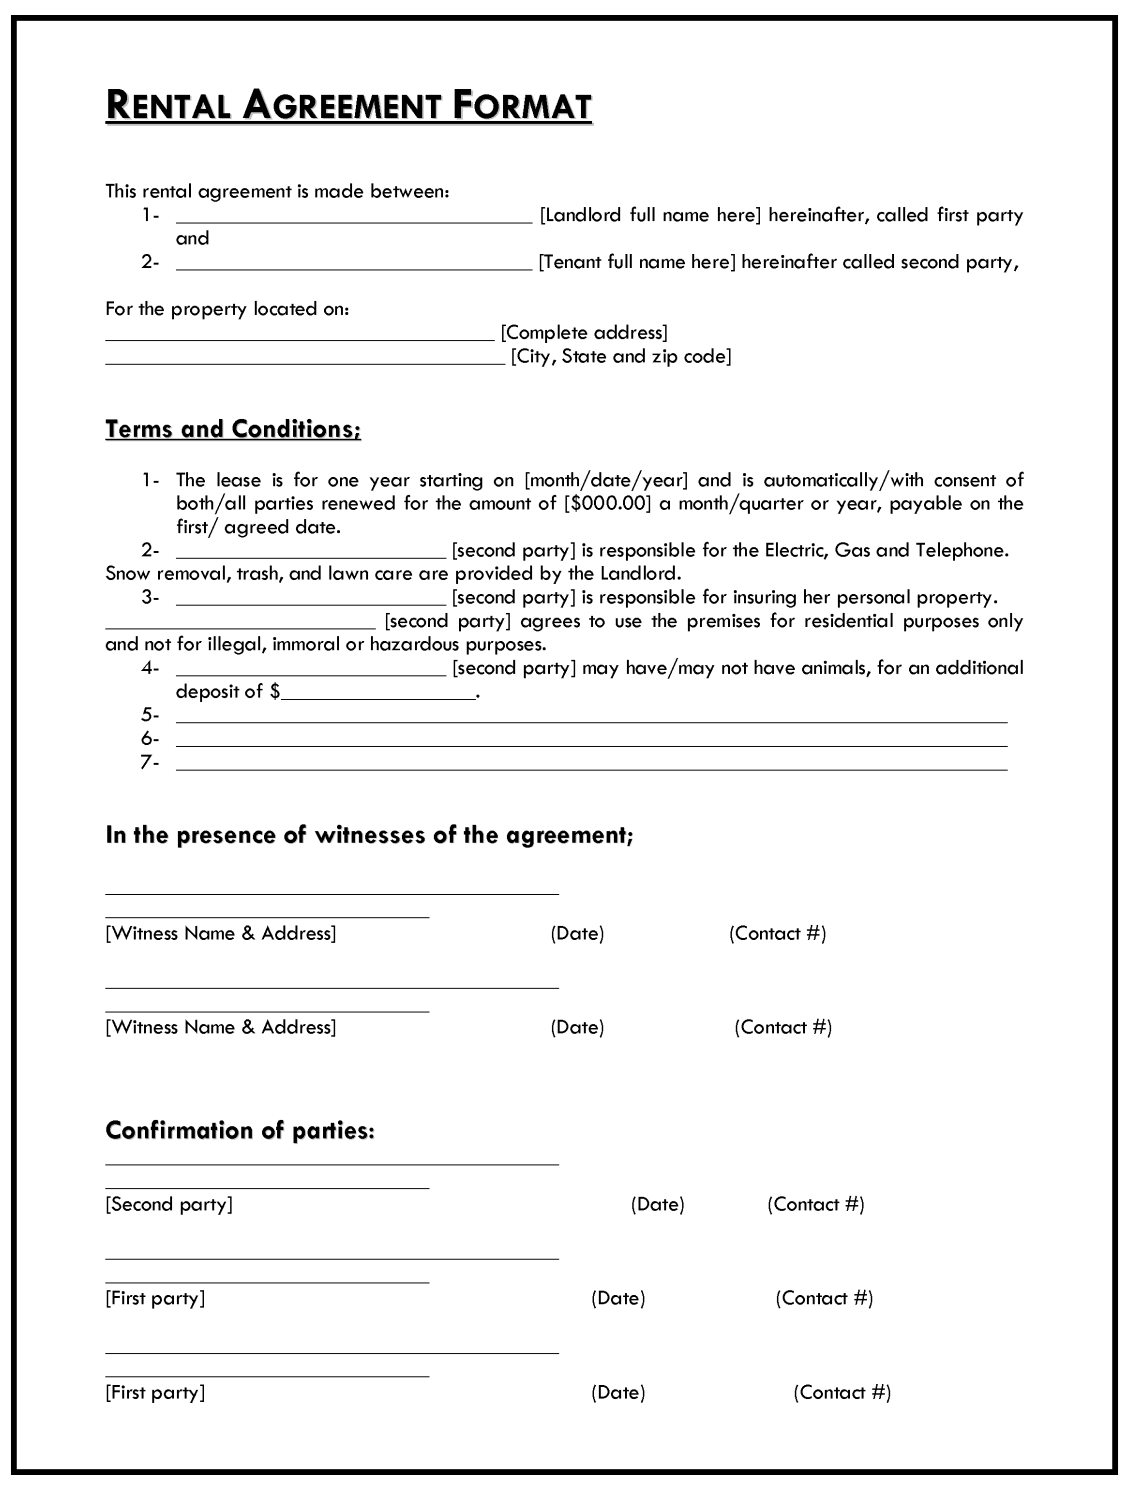 Template For A Rental Agreement